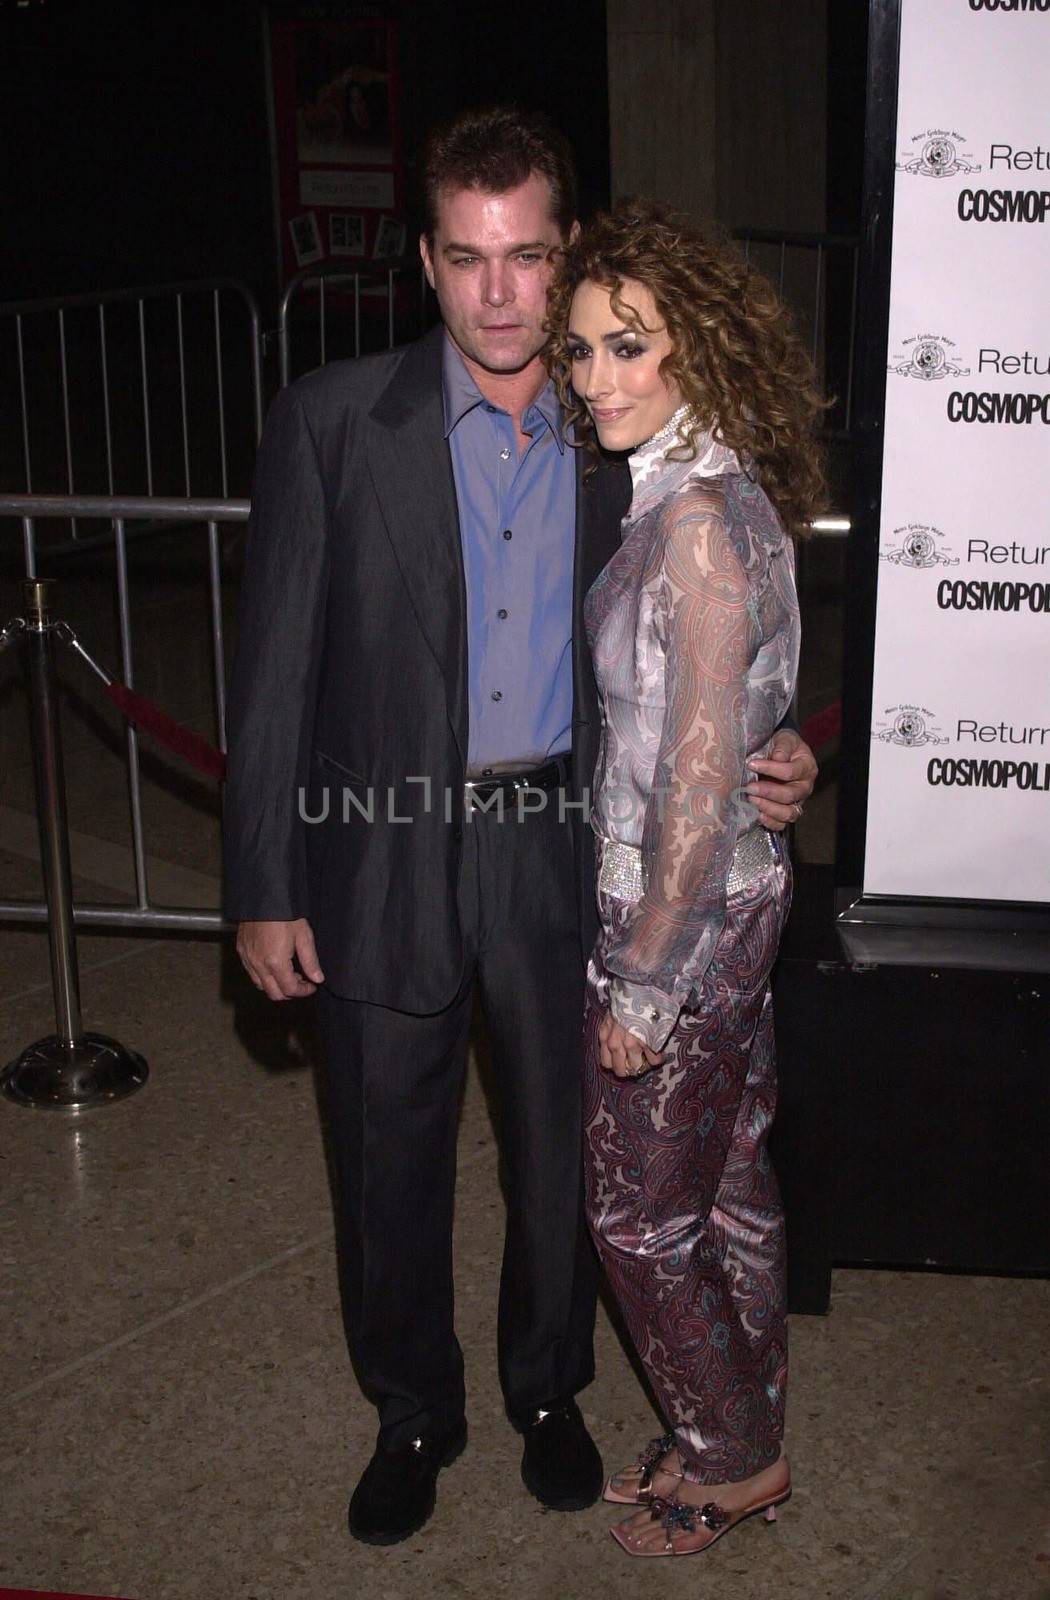 Ray Liotta and wife Michelle at the premiere of MGM's "RETURN TO ME" in Century City, 04-03-00